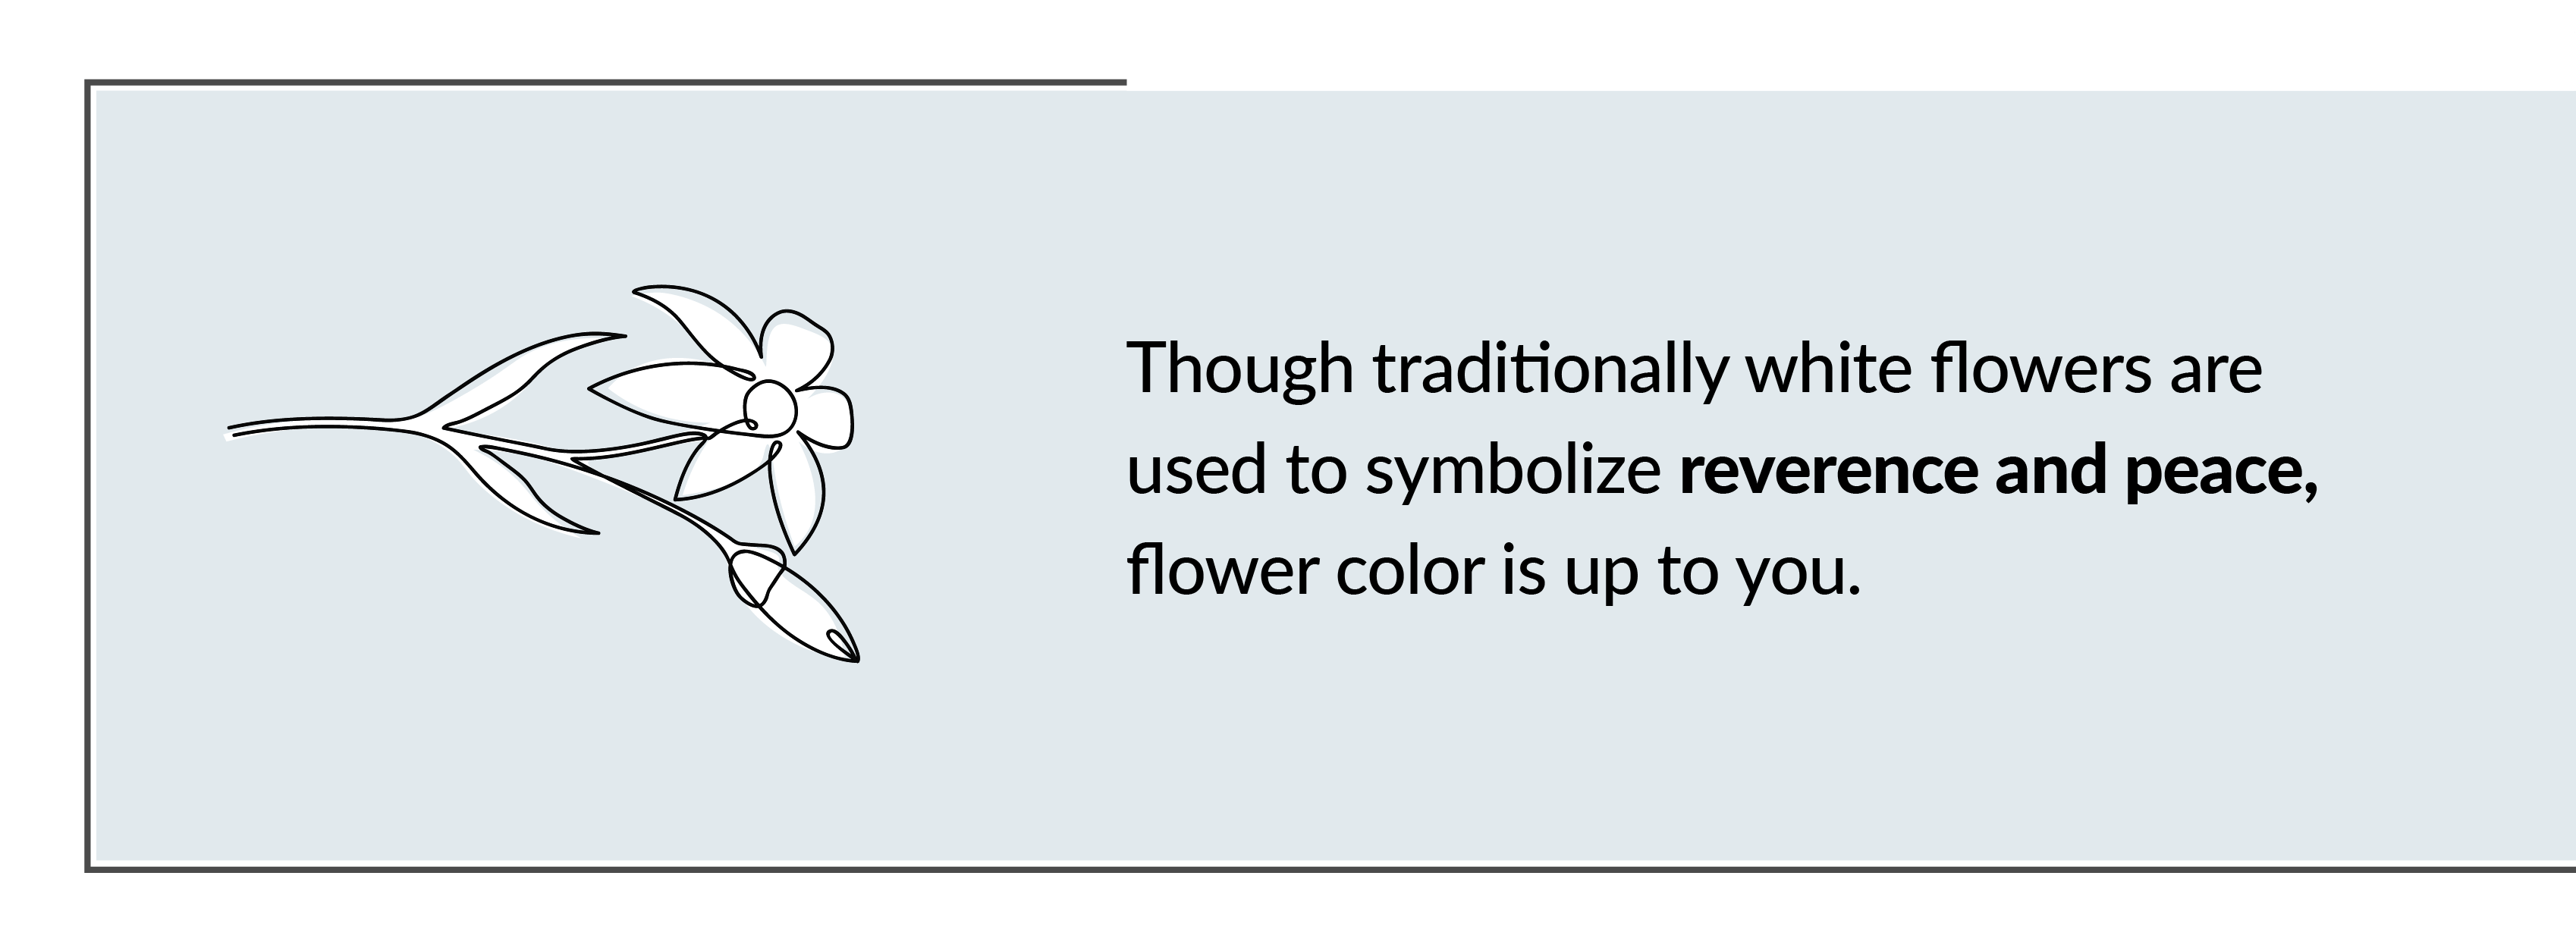 White flowers and tradition